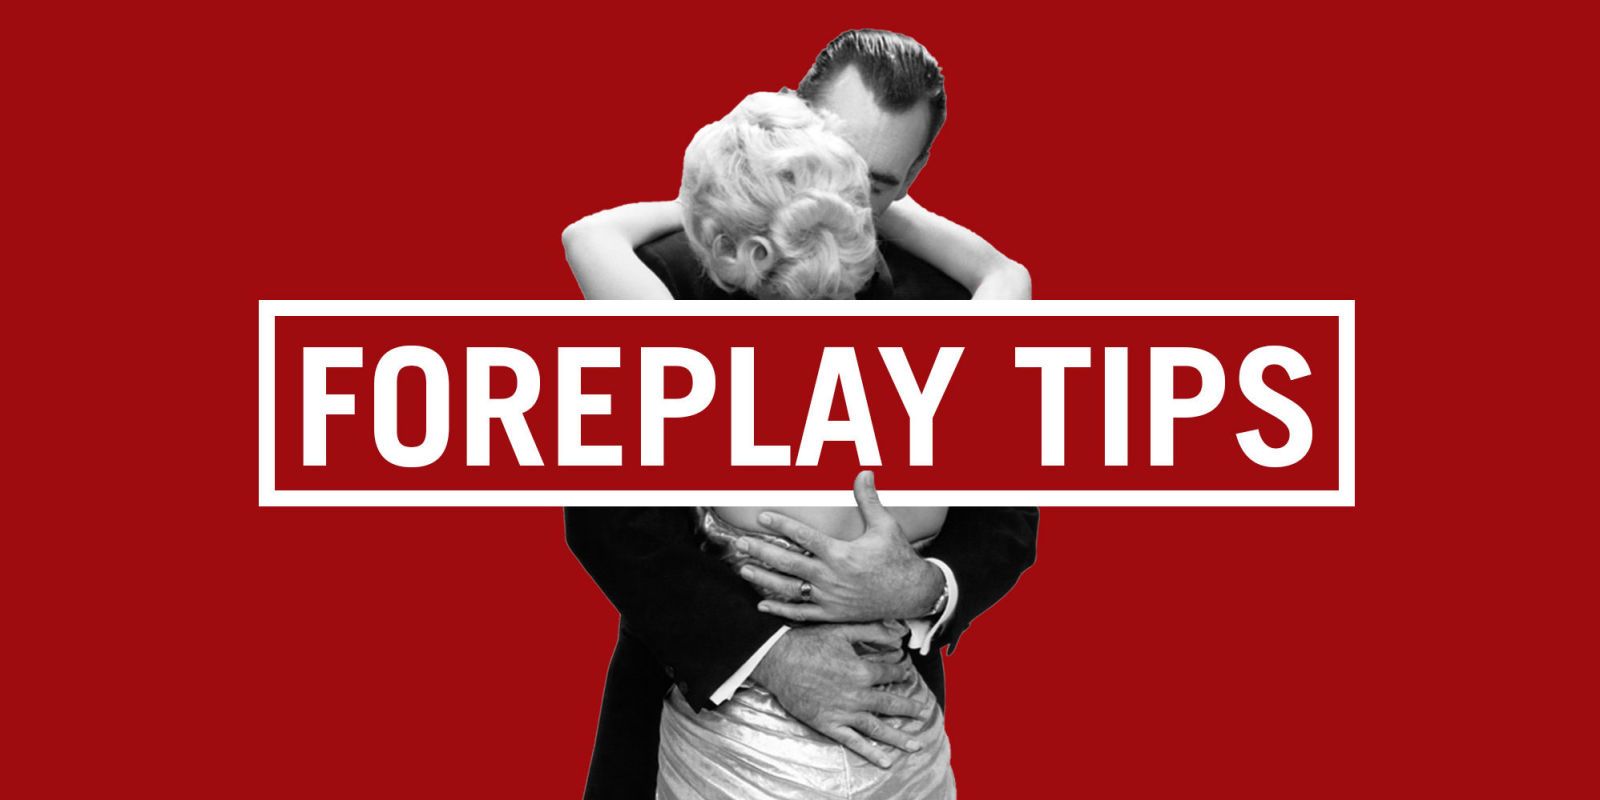 37 Foreplay Tips to Blow His Mind